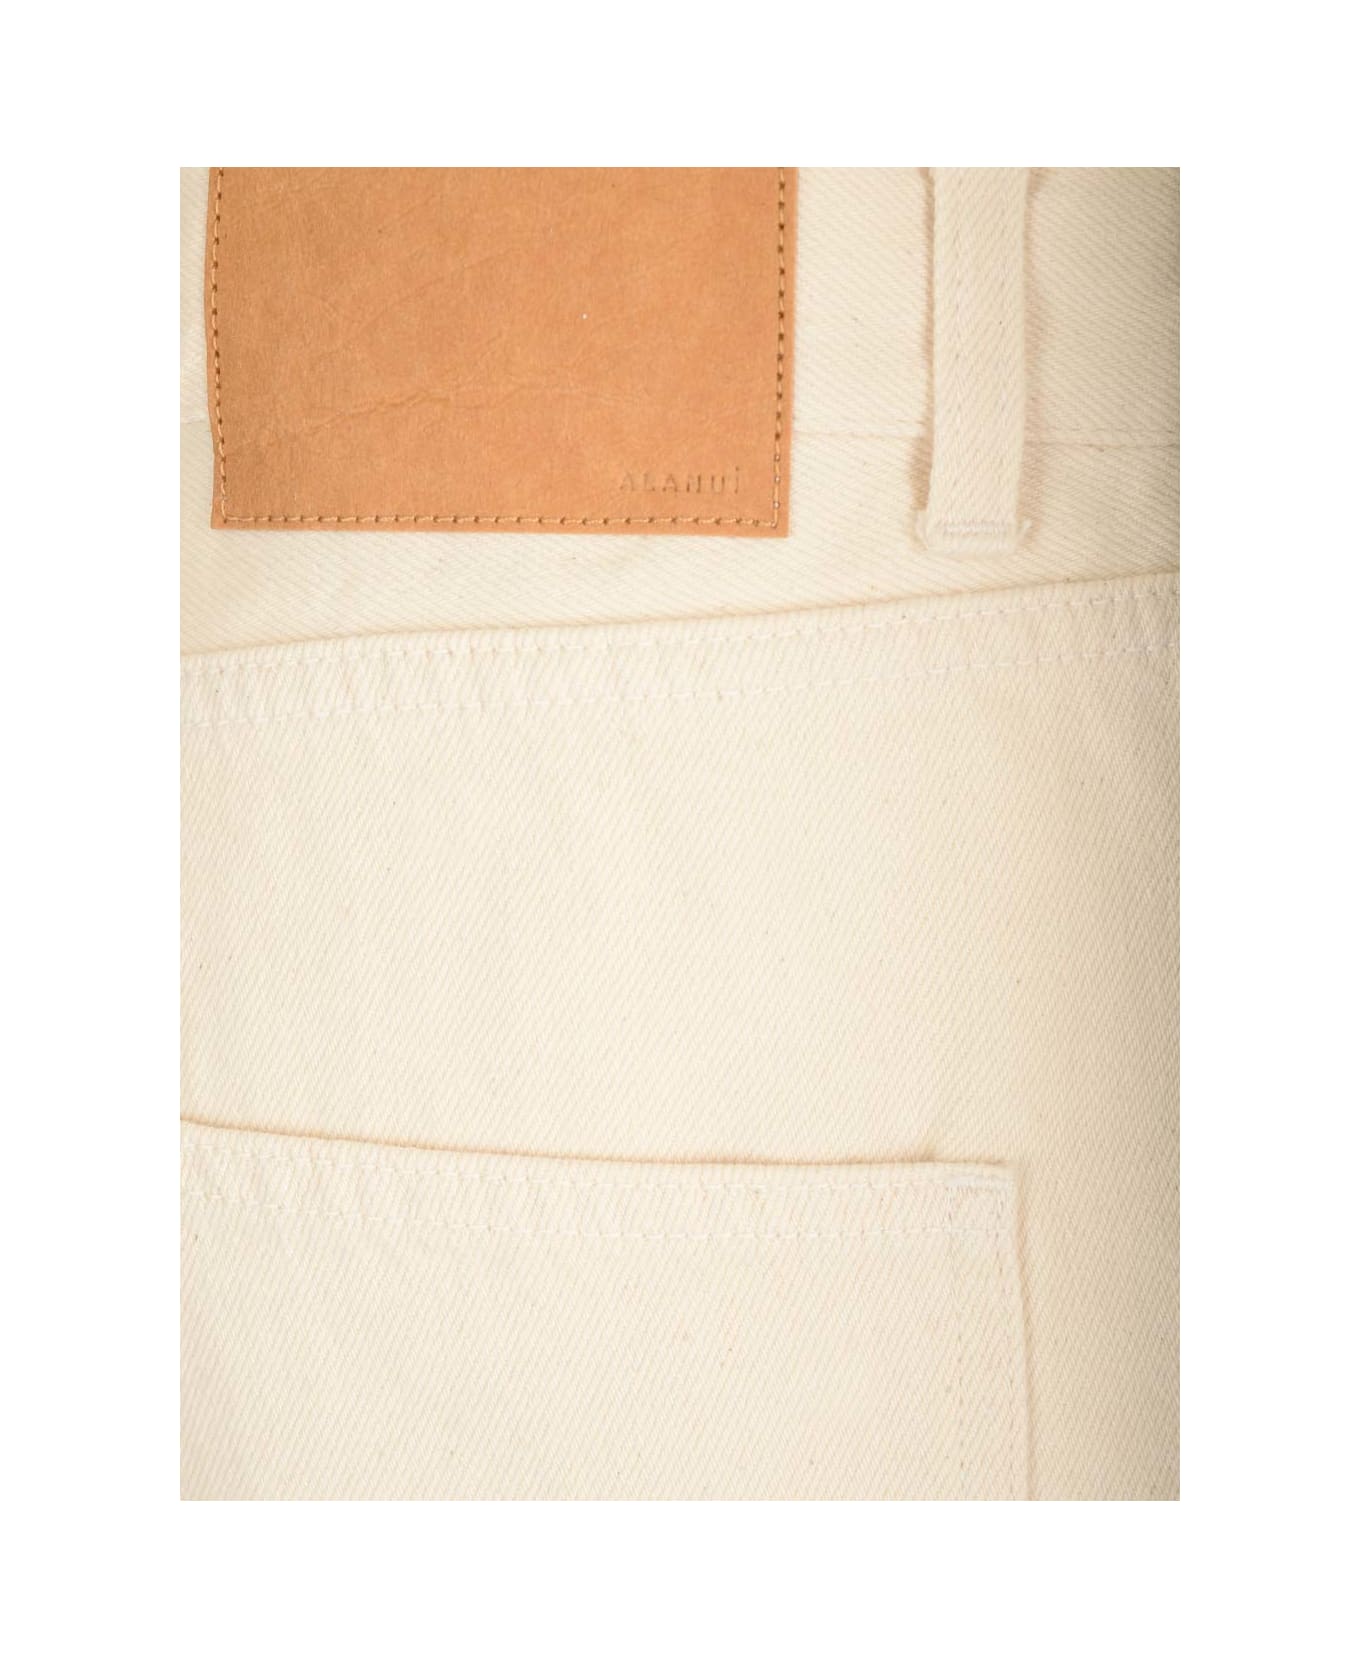 Alanui Straight Jeans With Dip-dye Effect - Sand